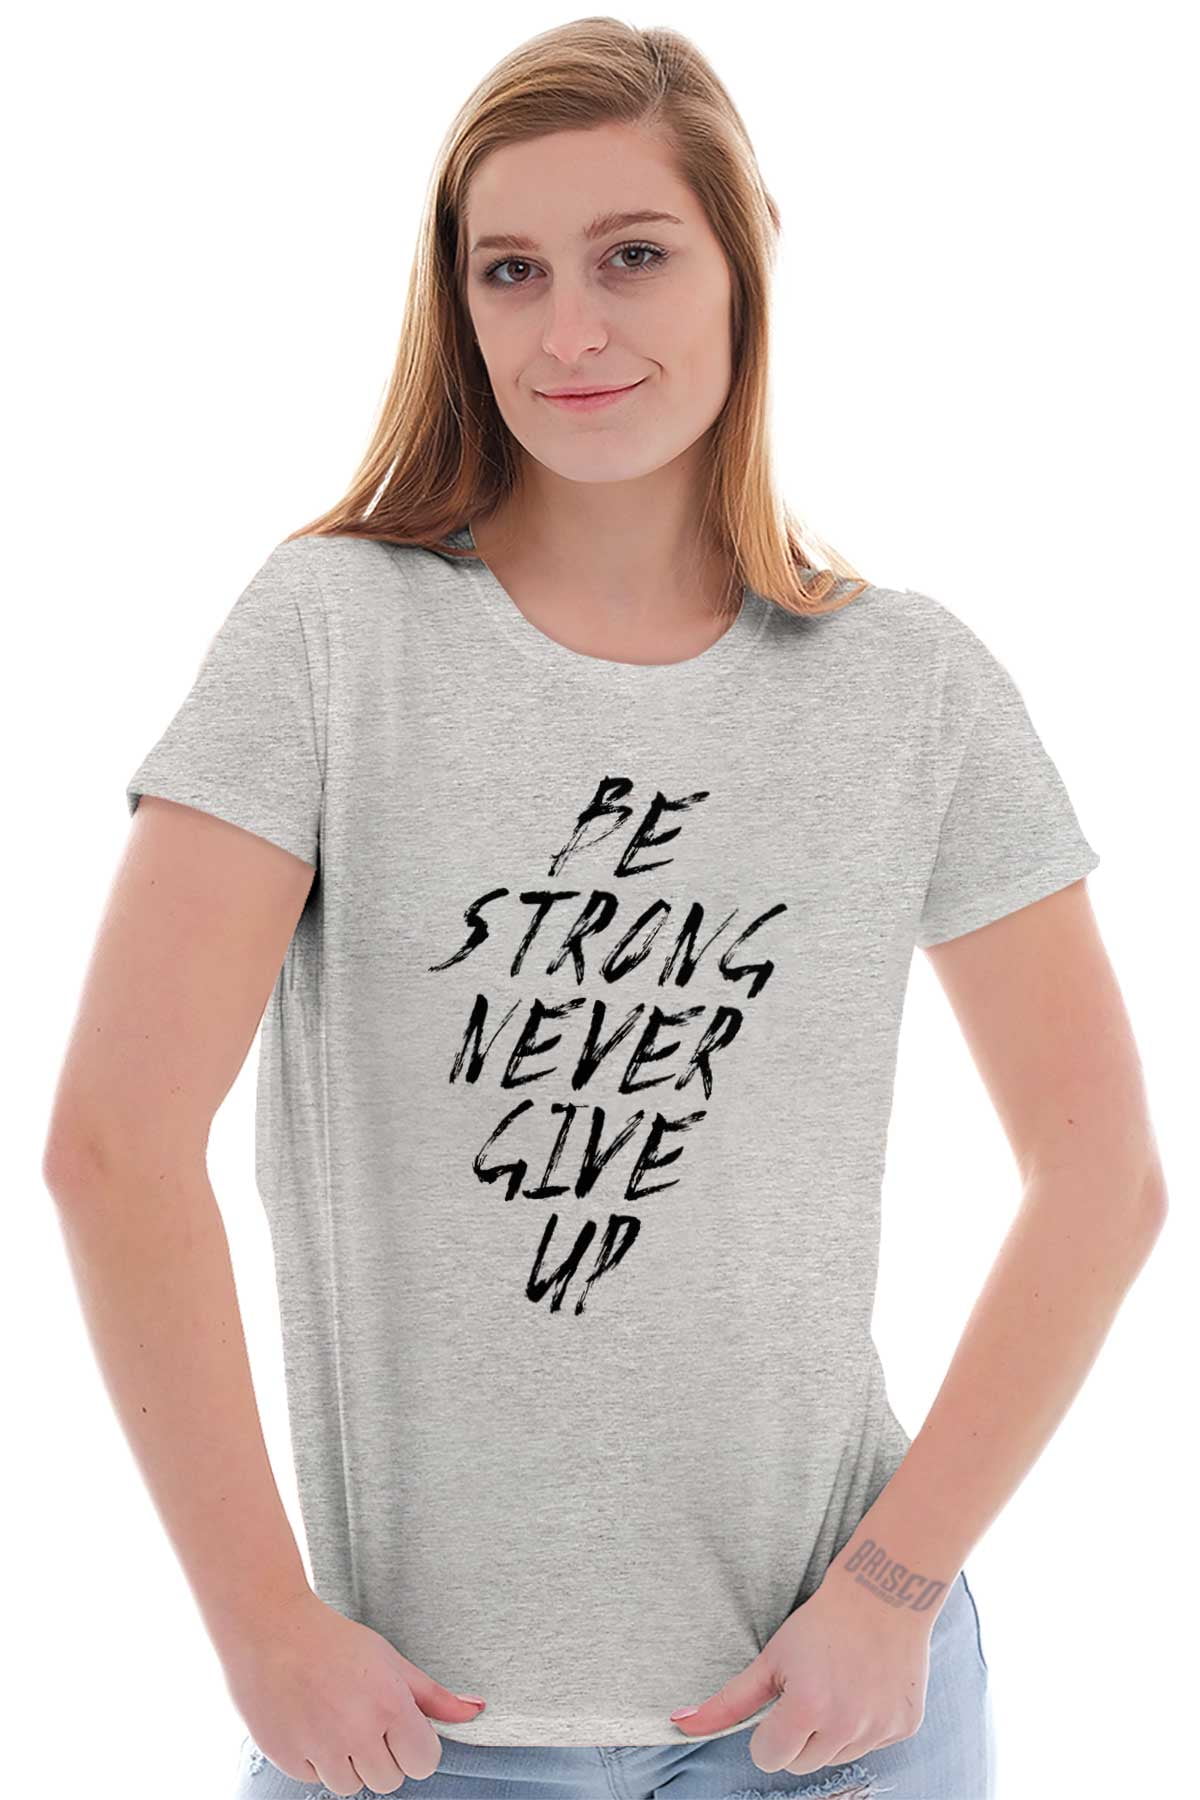 Sassy Tees Shirts Tshirts For Womens Be Strong Never Give Up ...